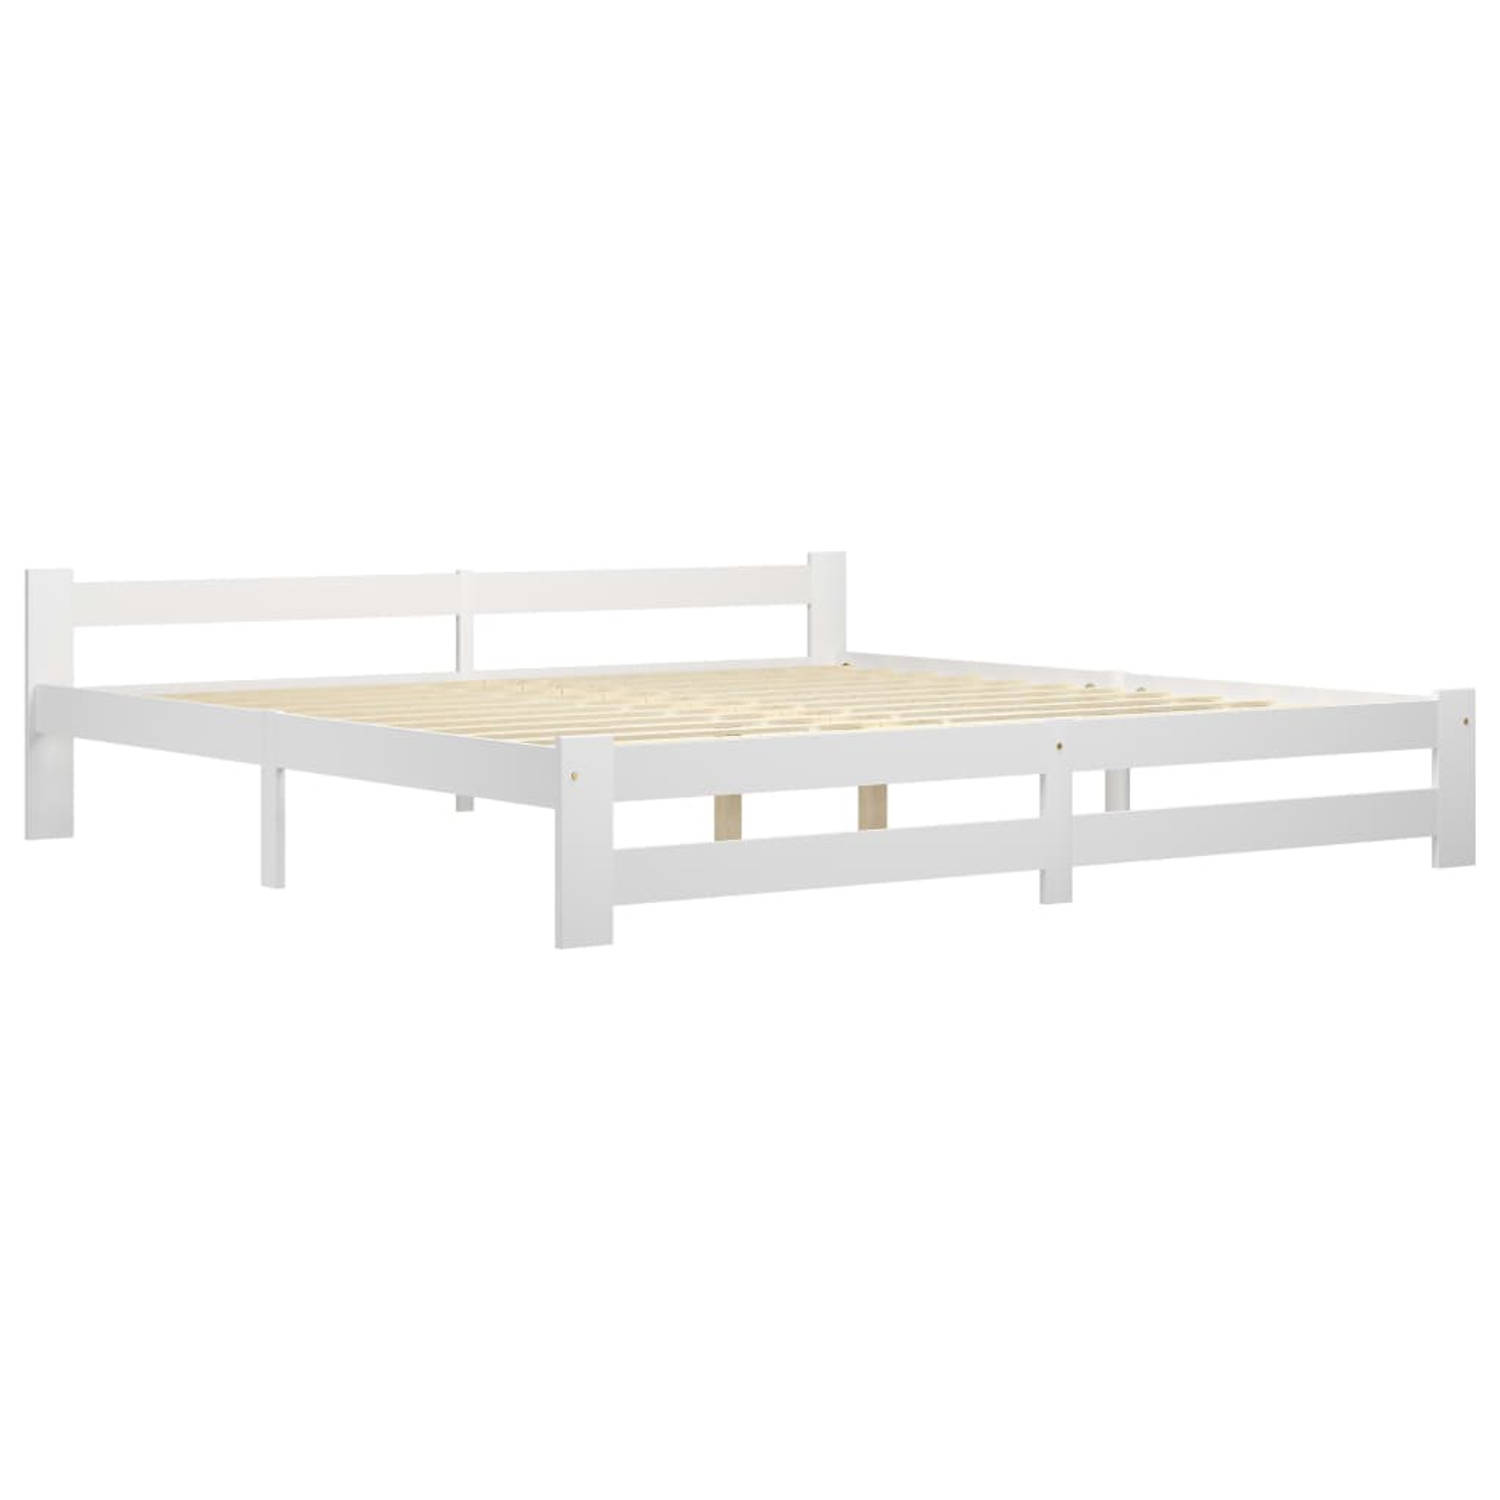 The Living Store Bedframe massief grenenhout wit 200x200 cm - Bedframe - Bedframes - Bed Frame - Bed Frames - Bed - Bedden - Houten Bedframe - Houten Bedframes - 2-persoonsbed - 2